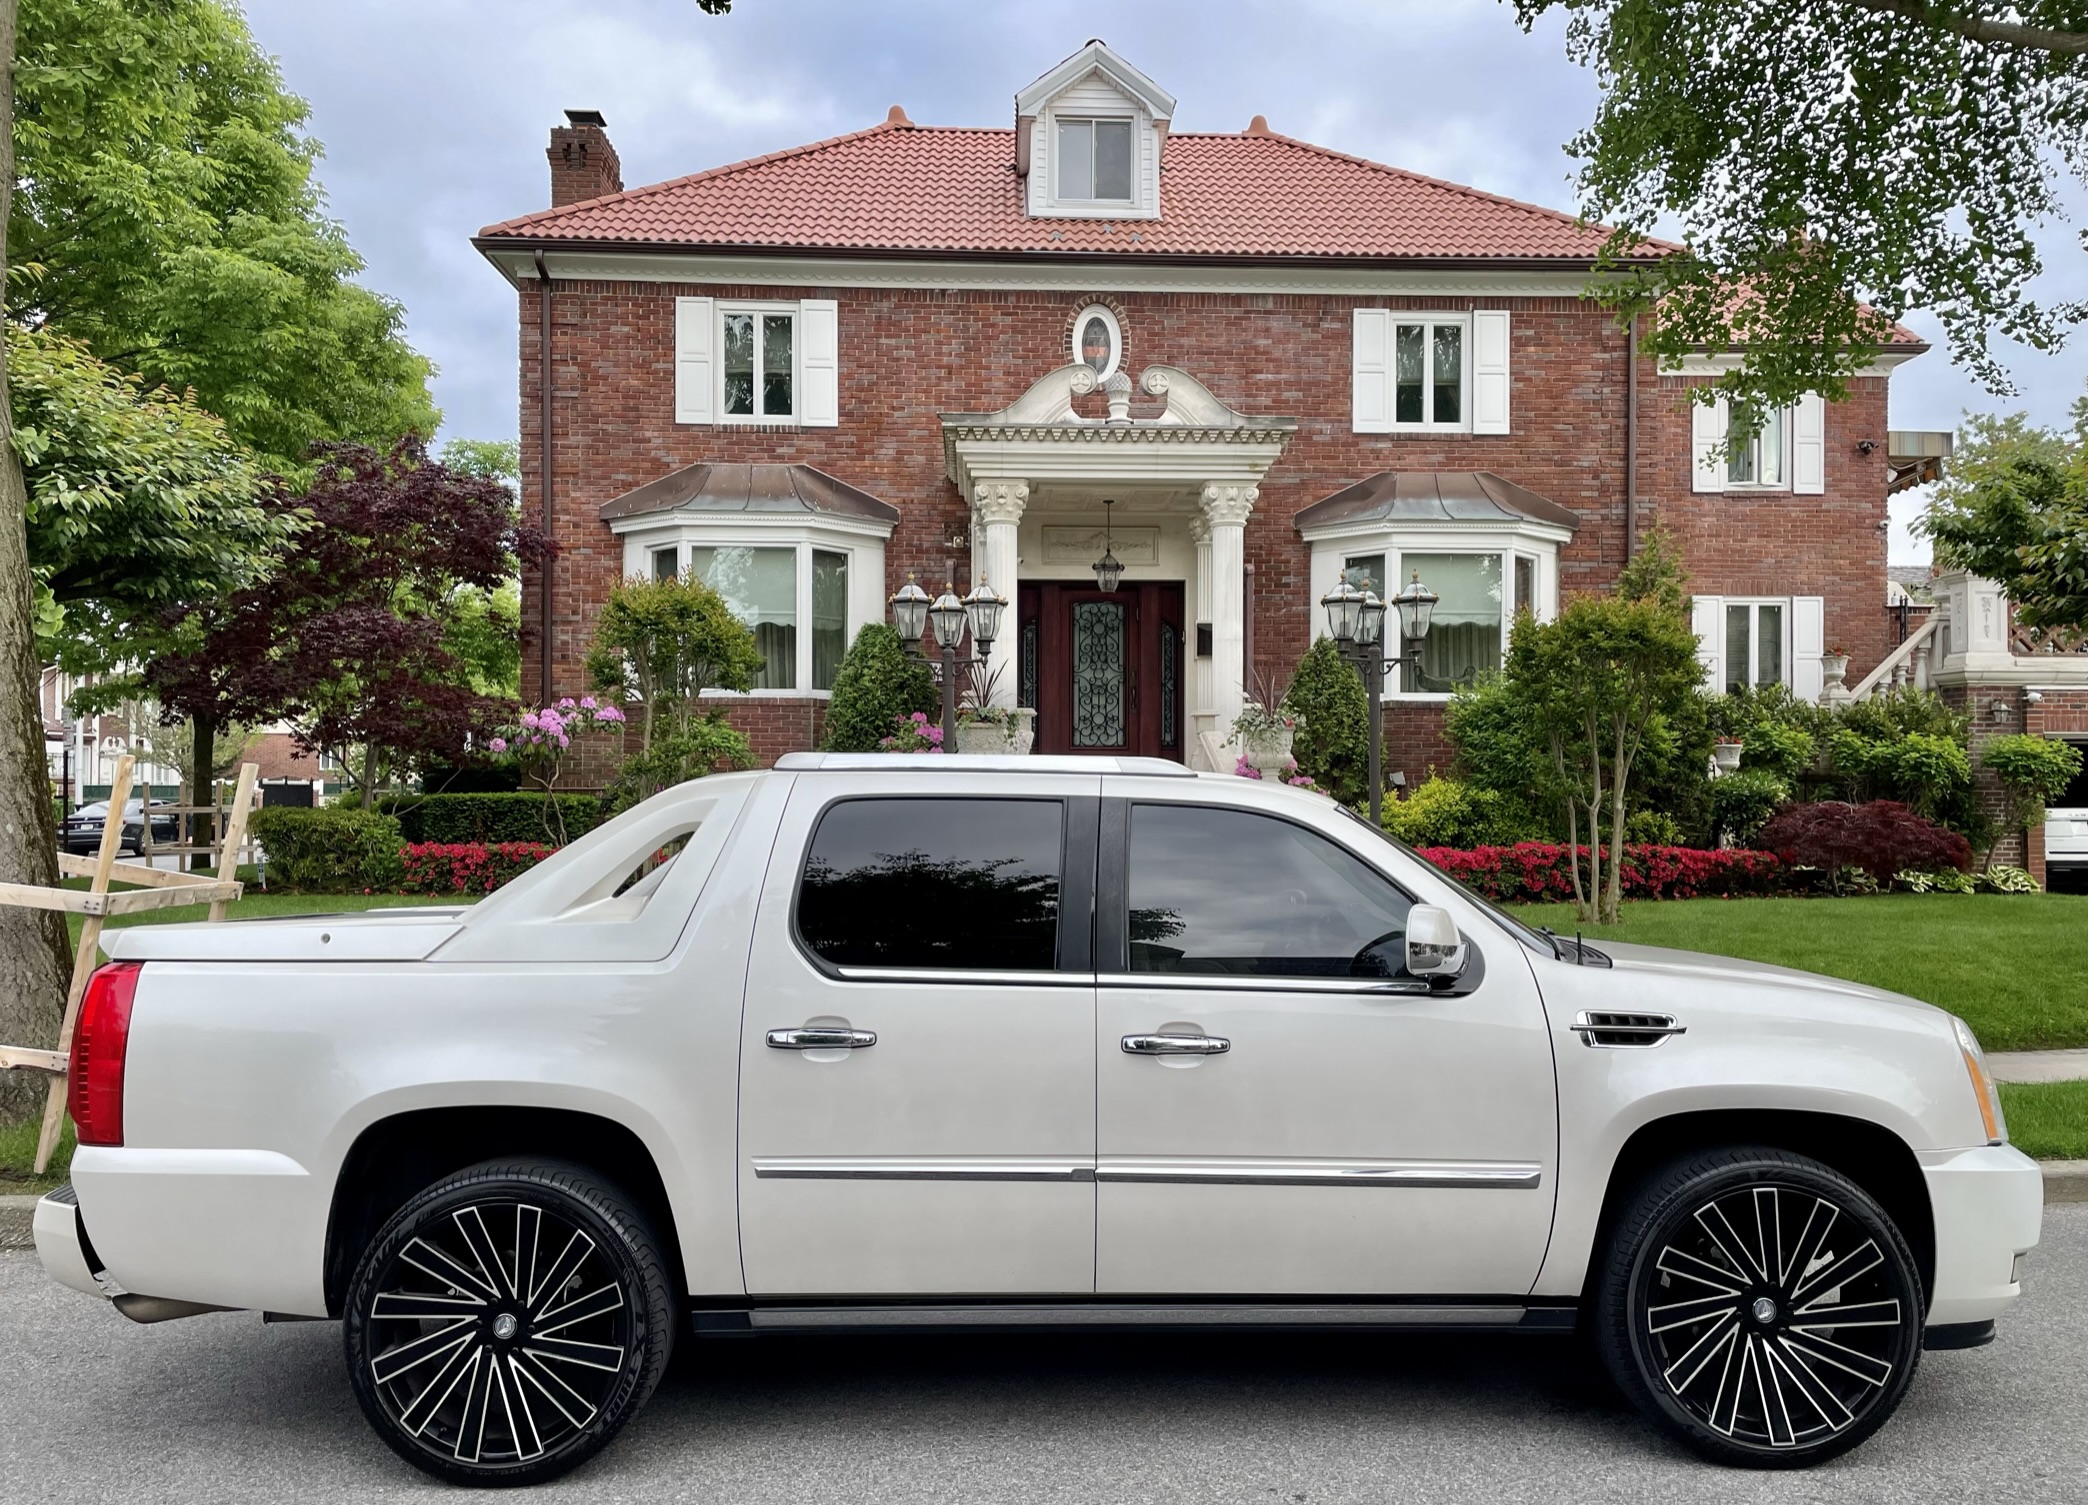 Buy Used 2007 CADILLAC ESCALADE EXT for $18 900 from trusted dealer in  Brooklyn, NY!